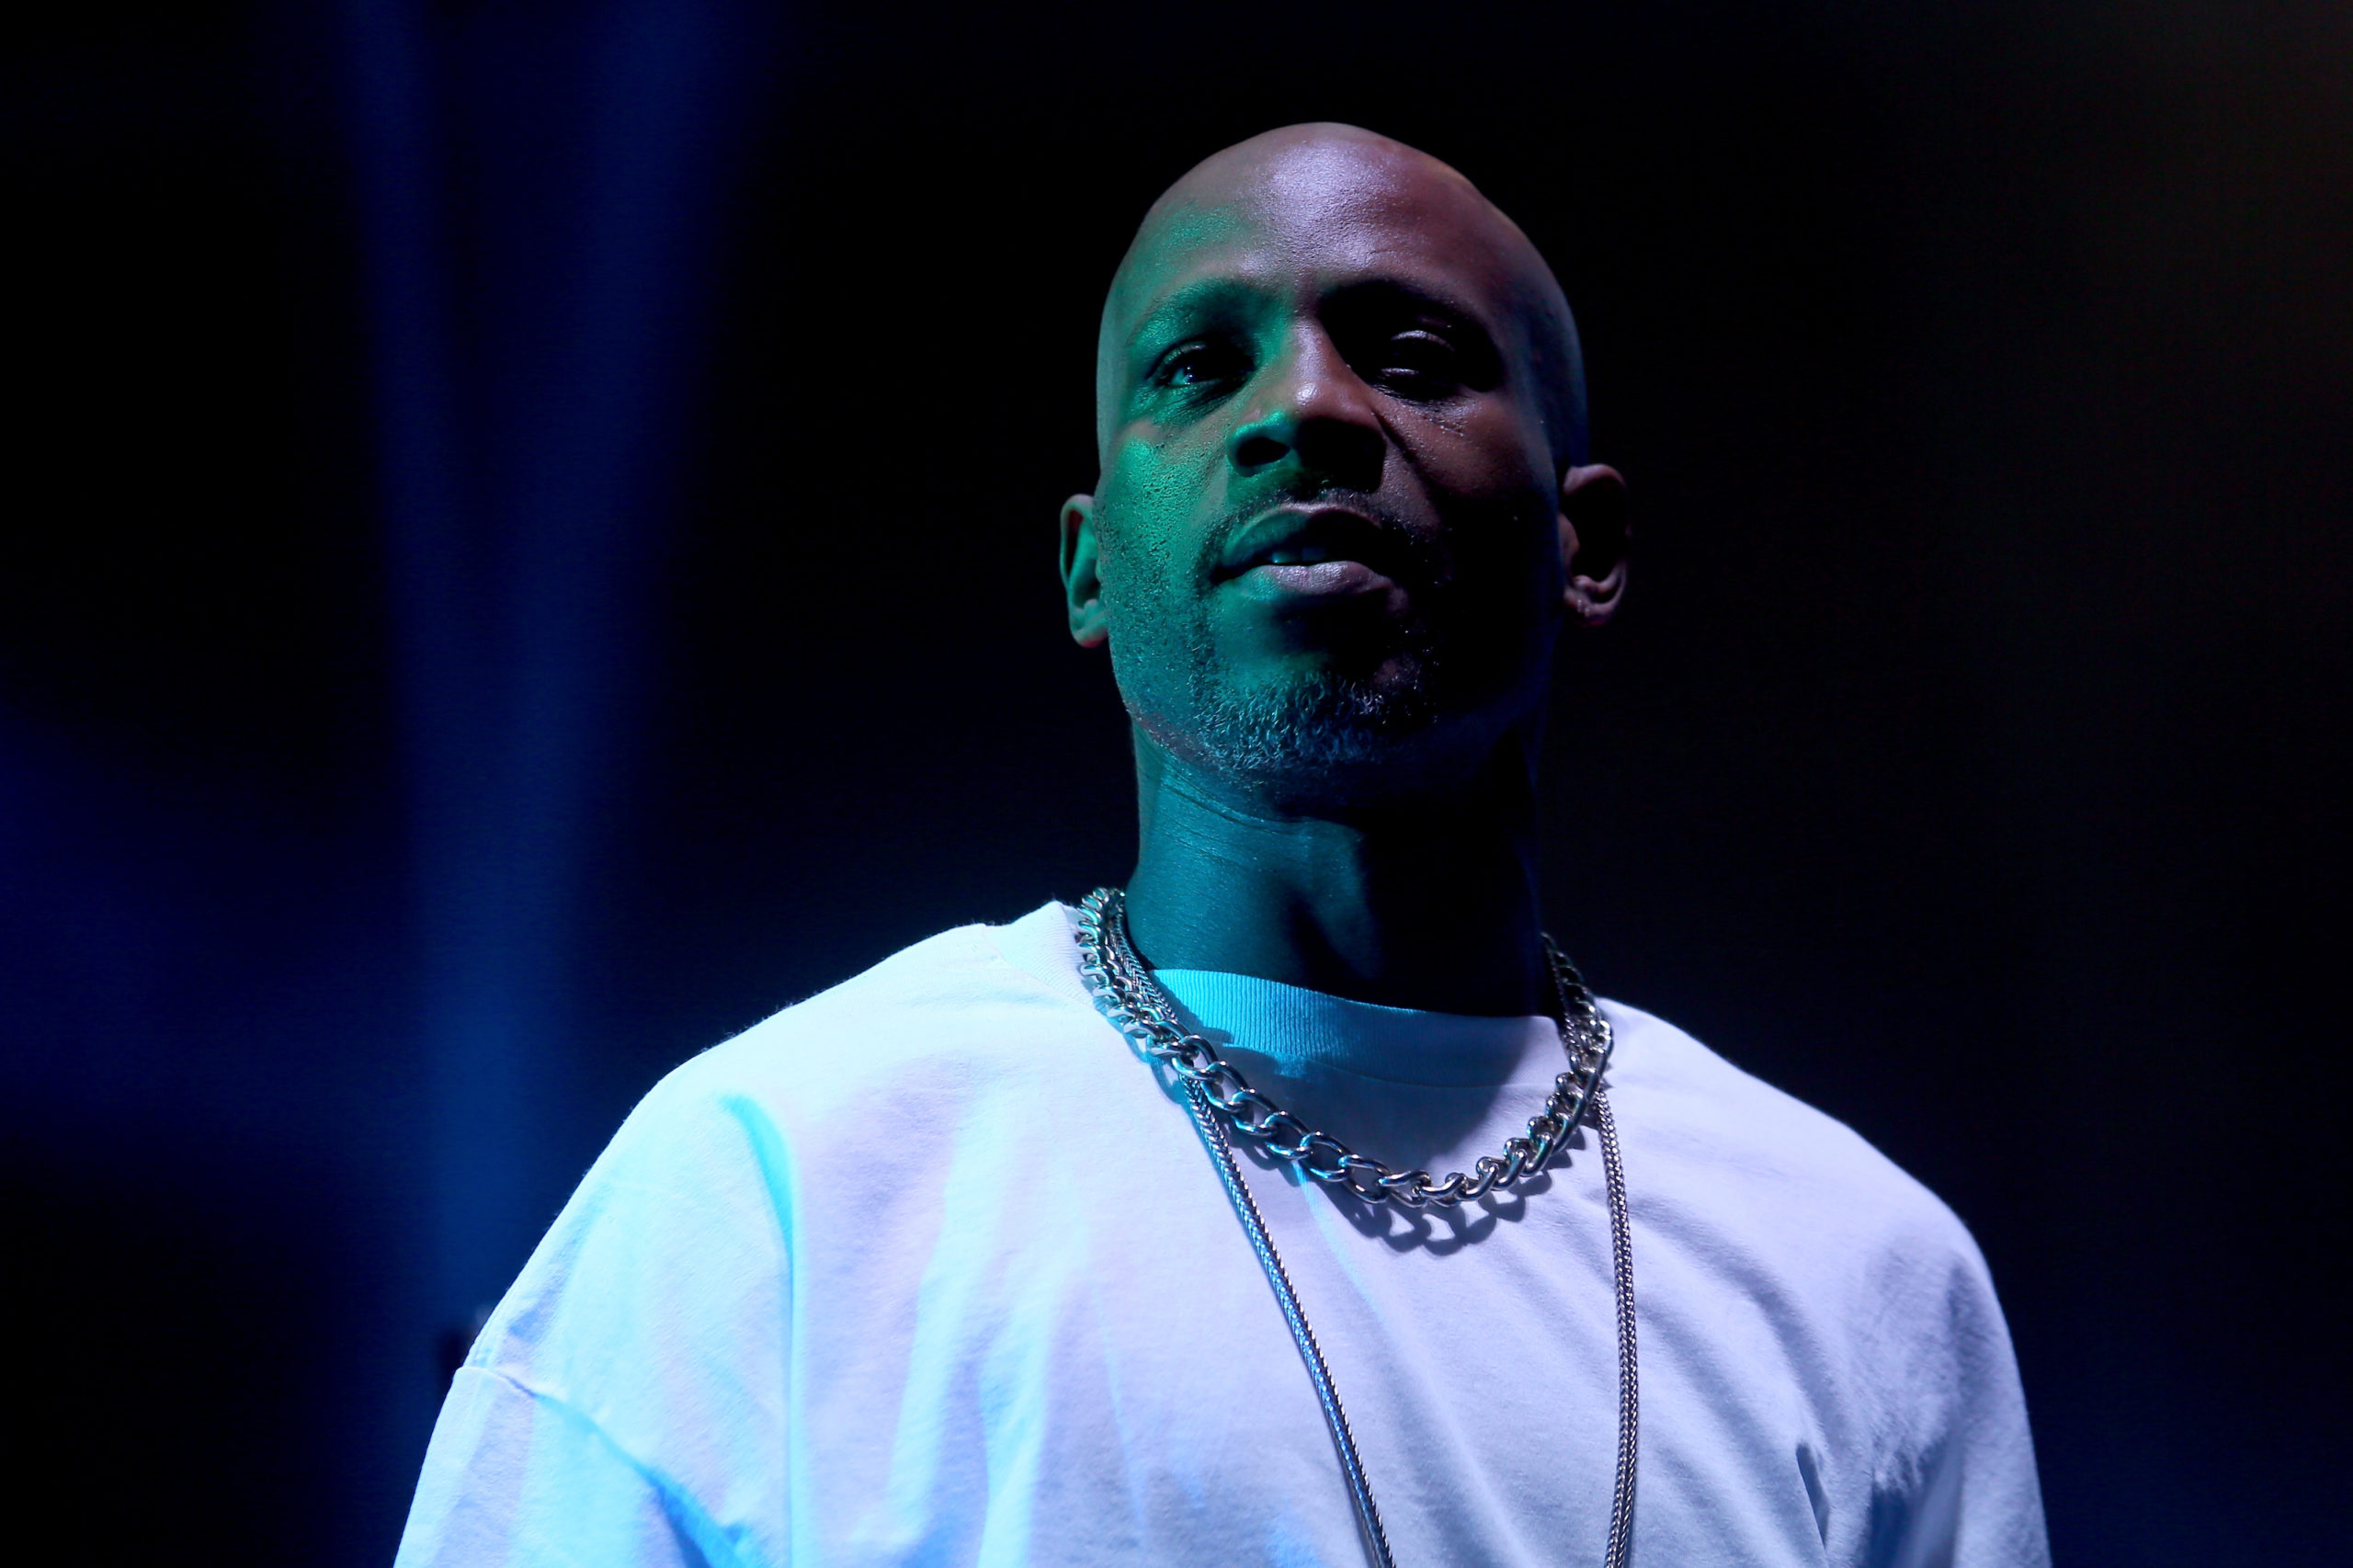 DMX Has To Reportedly Pay $2.3 Million After He Is Released From Prison